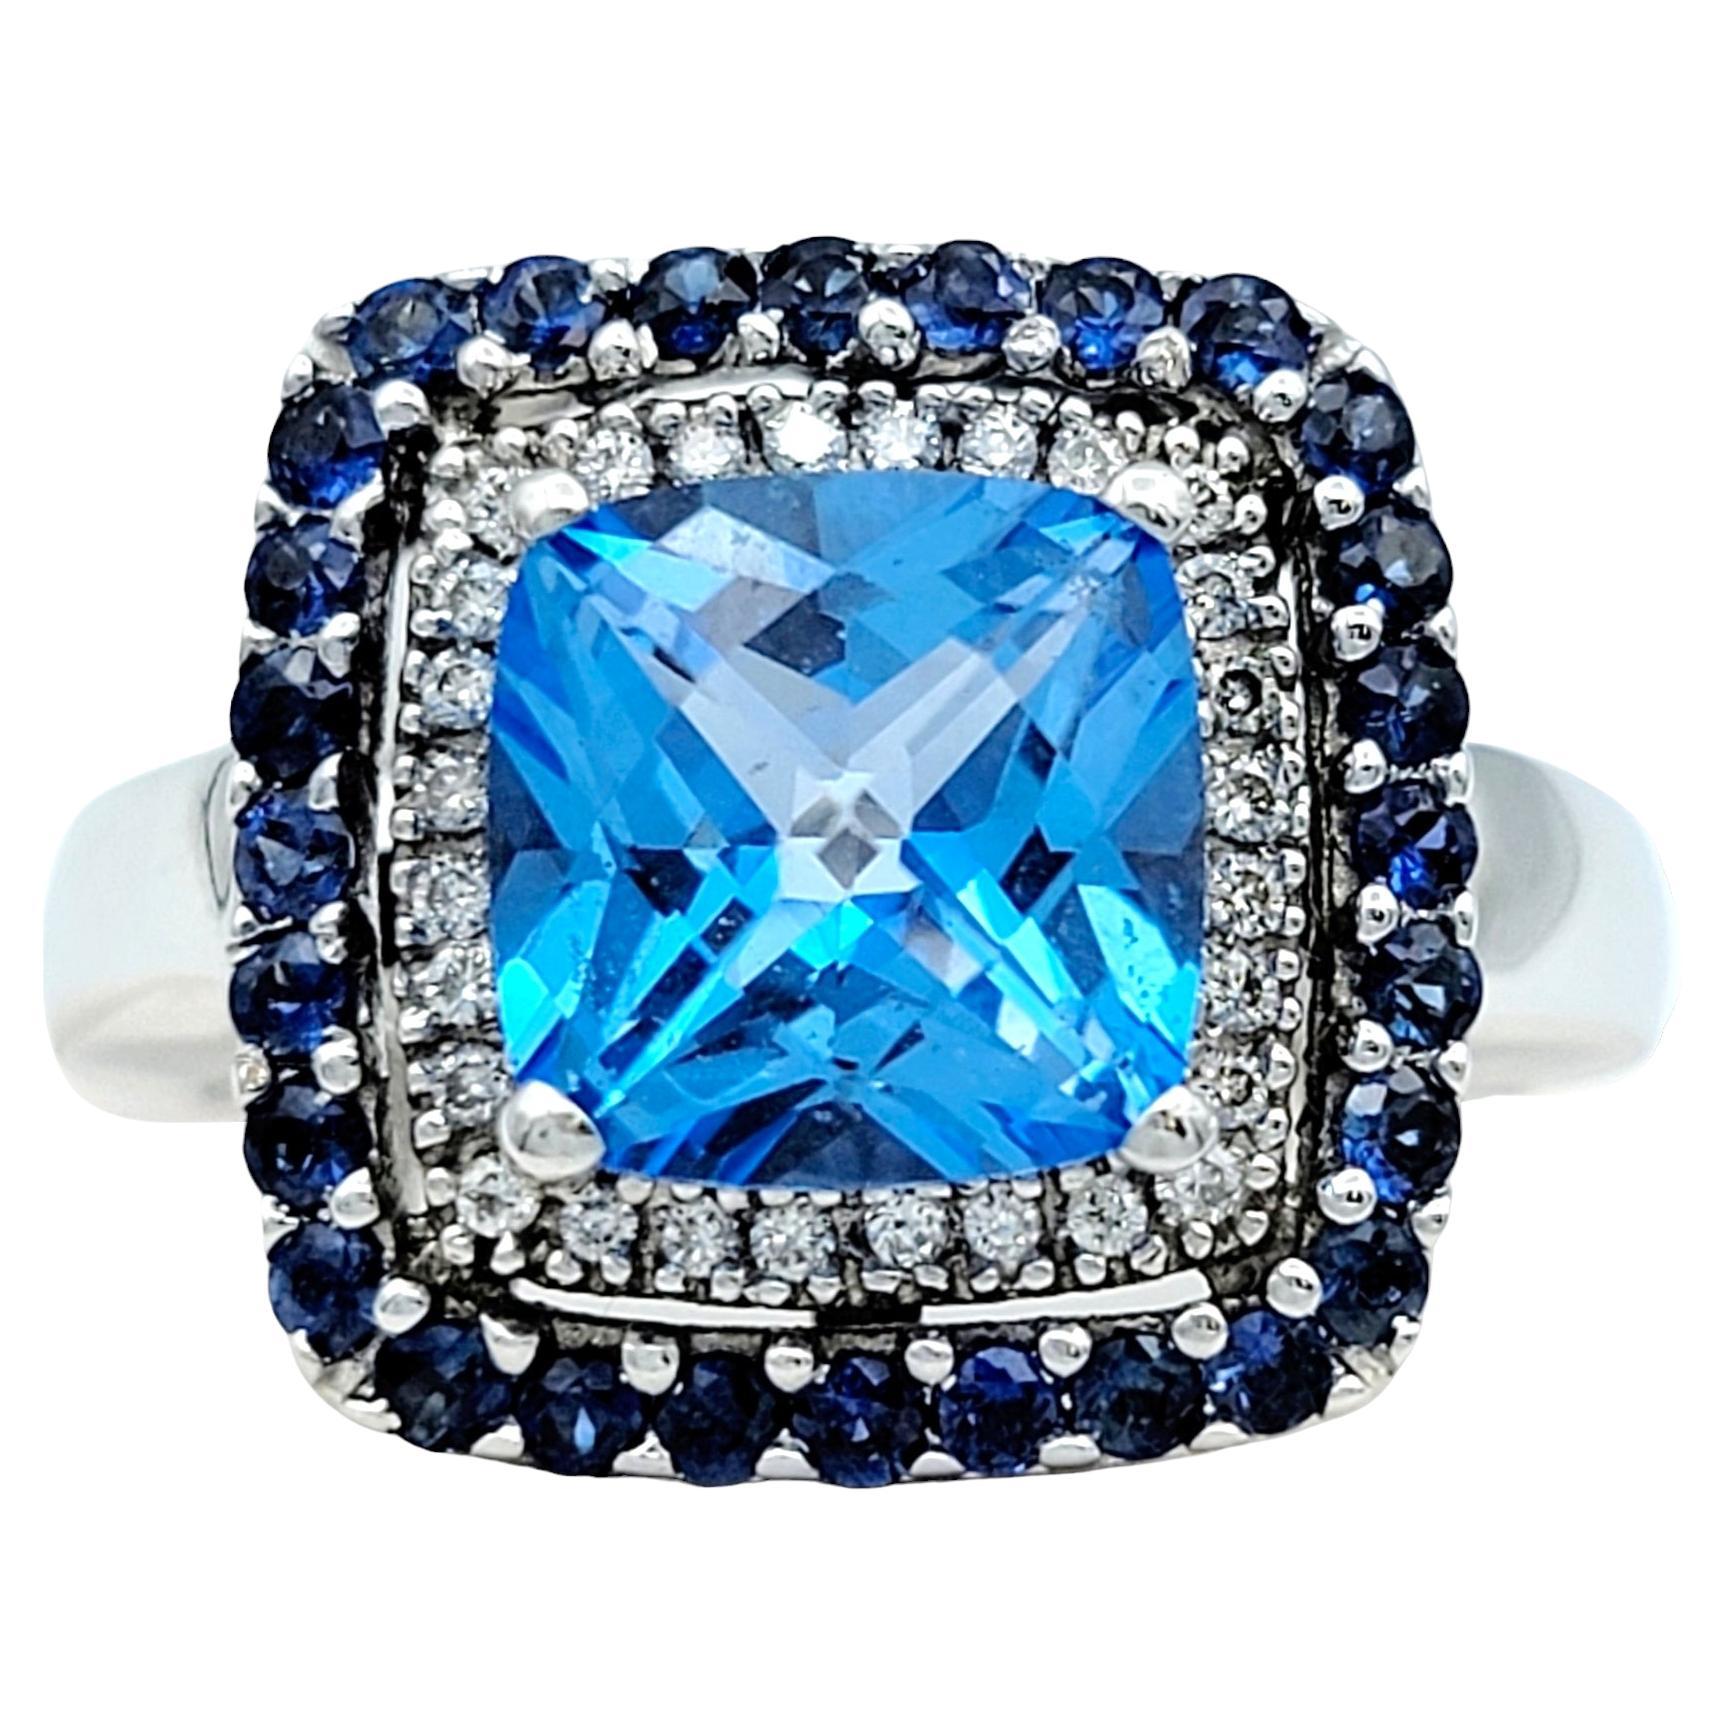 Le Vian Blue Topaz, Sapphire and Diamond Halo Cocktail Ring Set in 14 Karat Gold For Sale